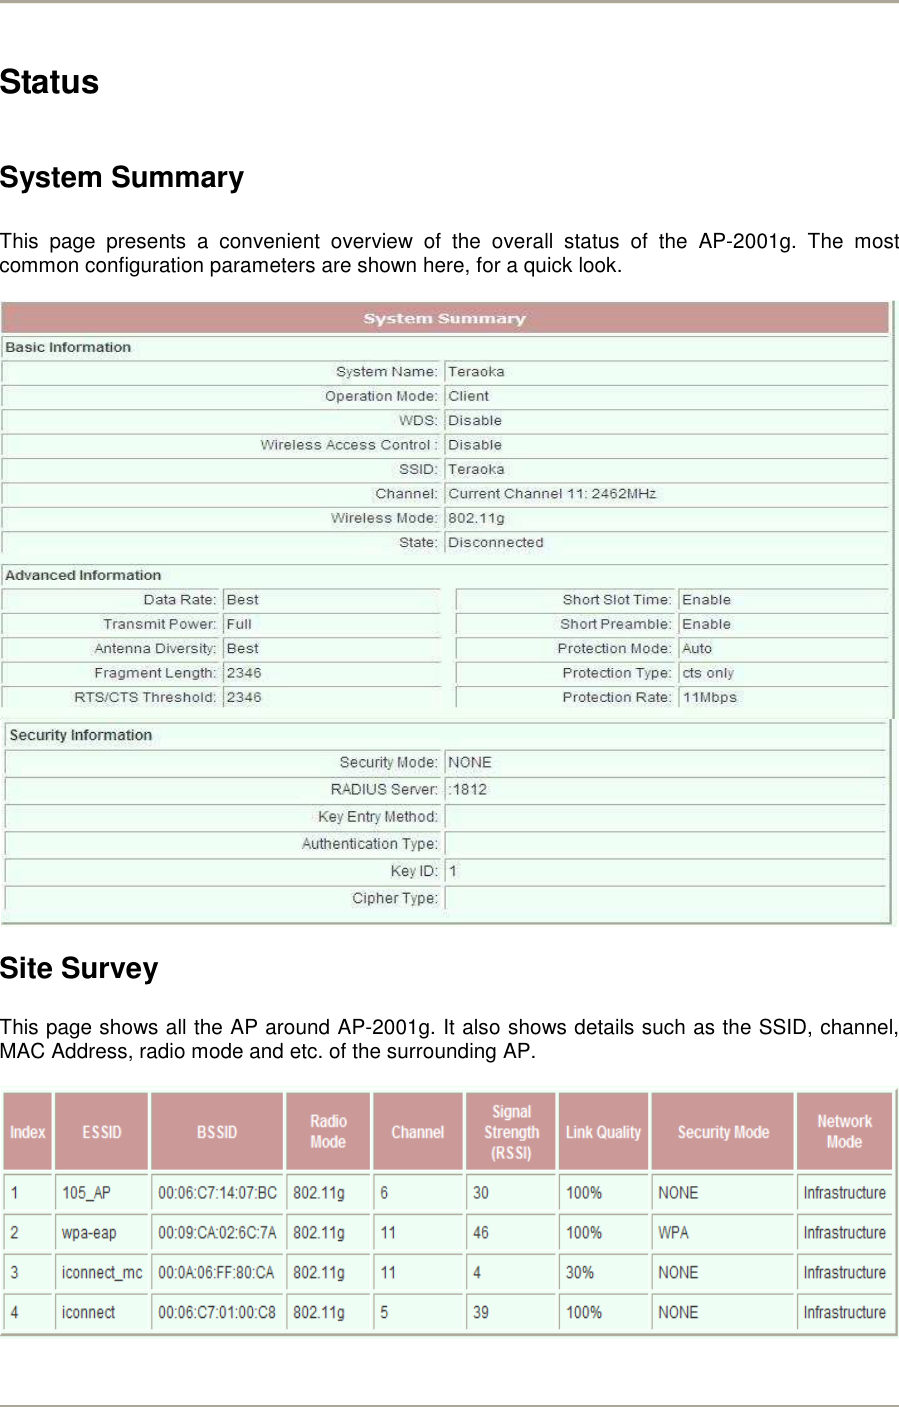        Status  System Summary  This  page  presents  a  convenient  overview  of  the  overall  status  of  the  AP-2001g.  The  most common configuration parameters are shown here, for a quick look.    Site Survey  This page shows all the AP around AP-2001g. It also shows details such as the SSID, channel, MAC Address, radio mode and etc. of the surrounding AP.     